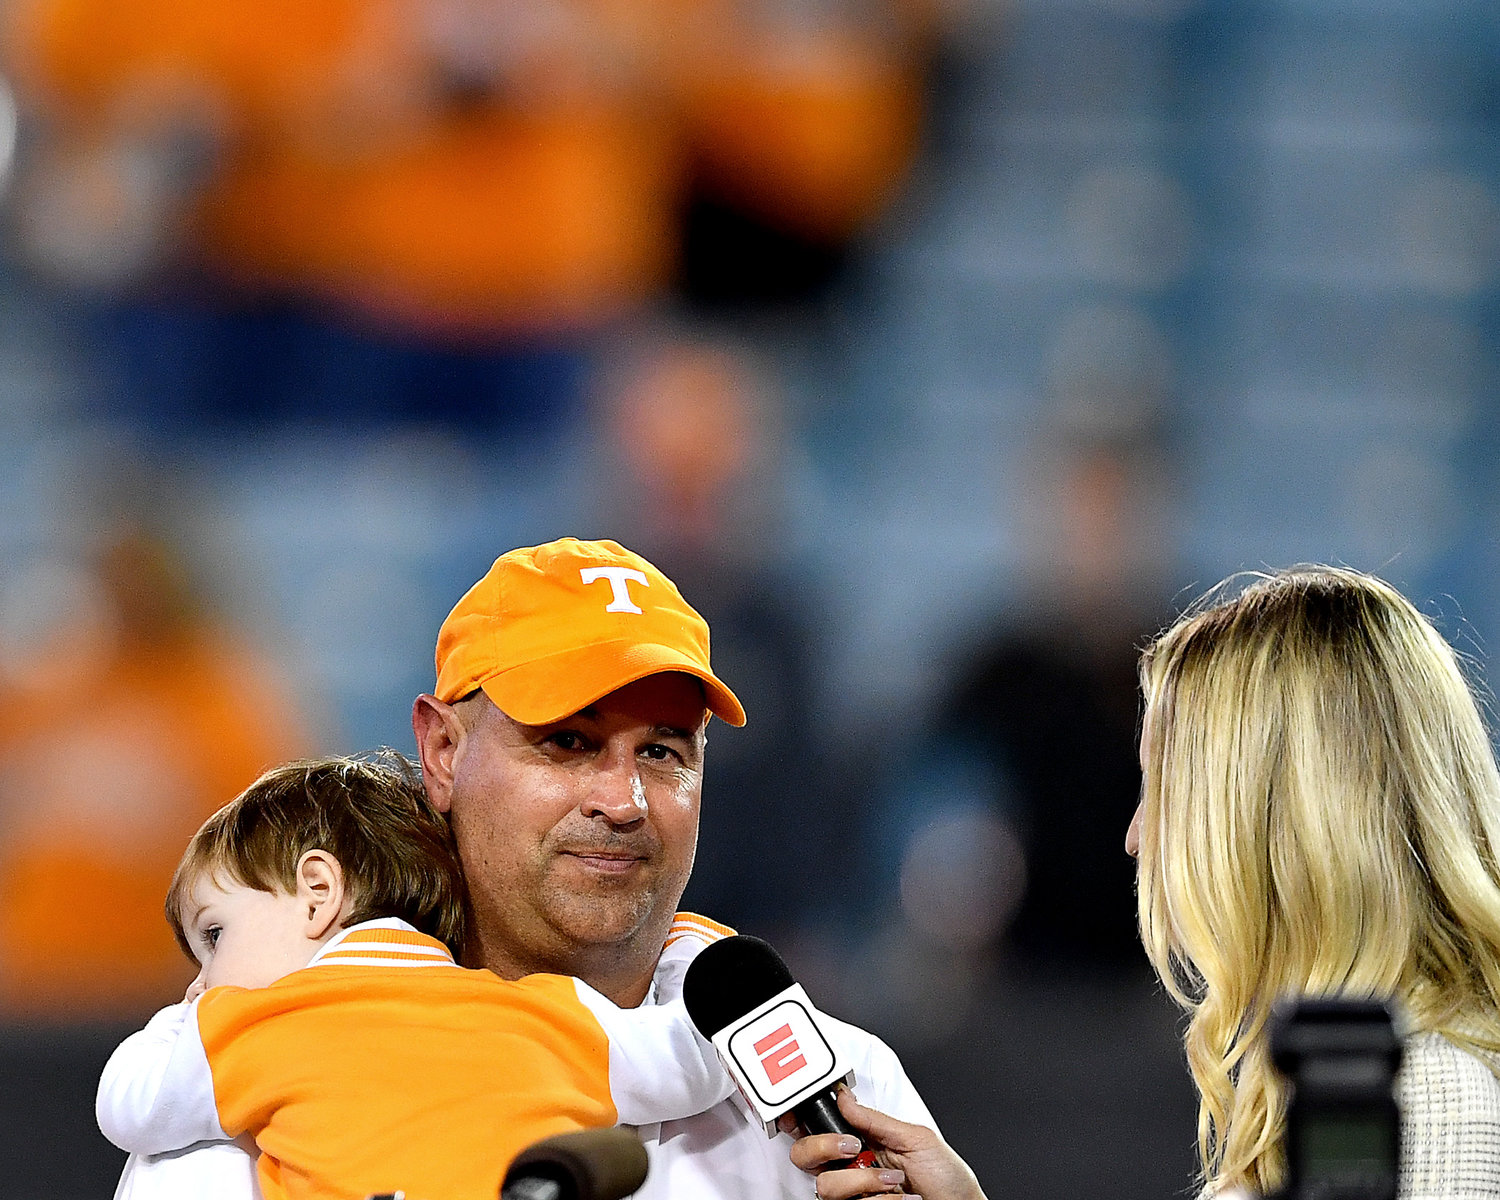 Tennessee Volunteers head coach Jeremy Pruitt speaks with an ESPN reporter while his son rests on his shoulder following the Vols win over the Indiana Hoosiers at the Gator Bowl Thursday, January 2, 2020, at TIAA Bank Field in Jacksonville, Fla.